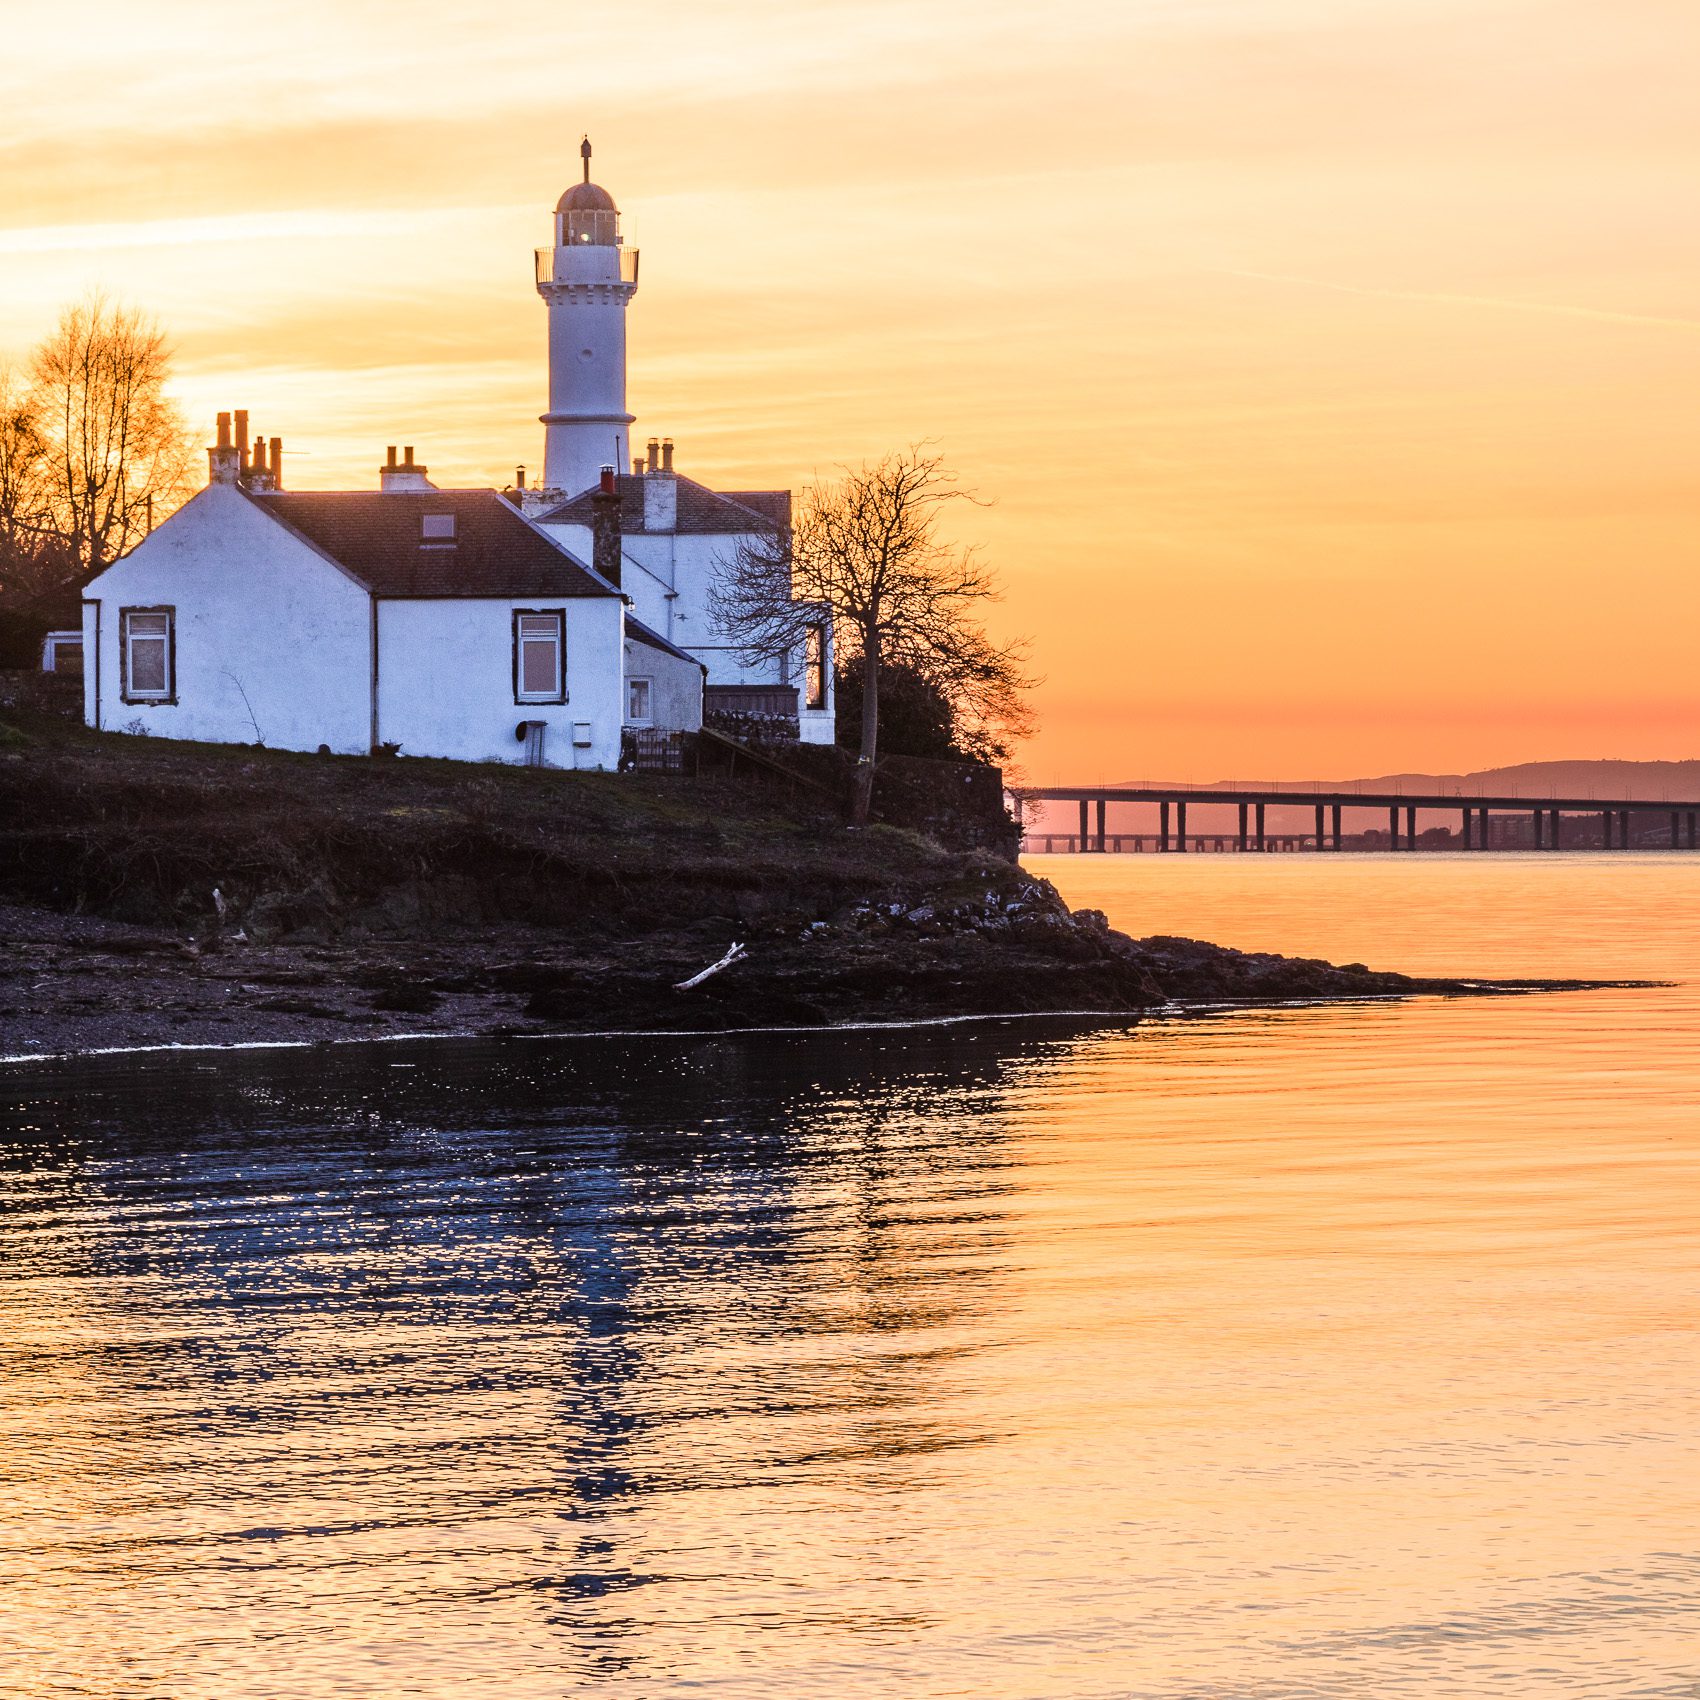 Sun setting behind Tayport West Lighthouse on the Firth of Tay, Fife, Scotland RT006